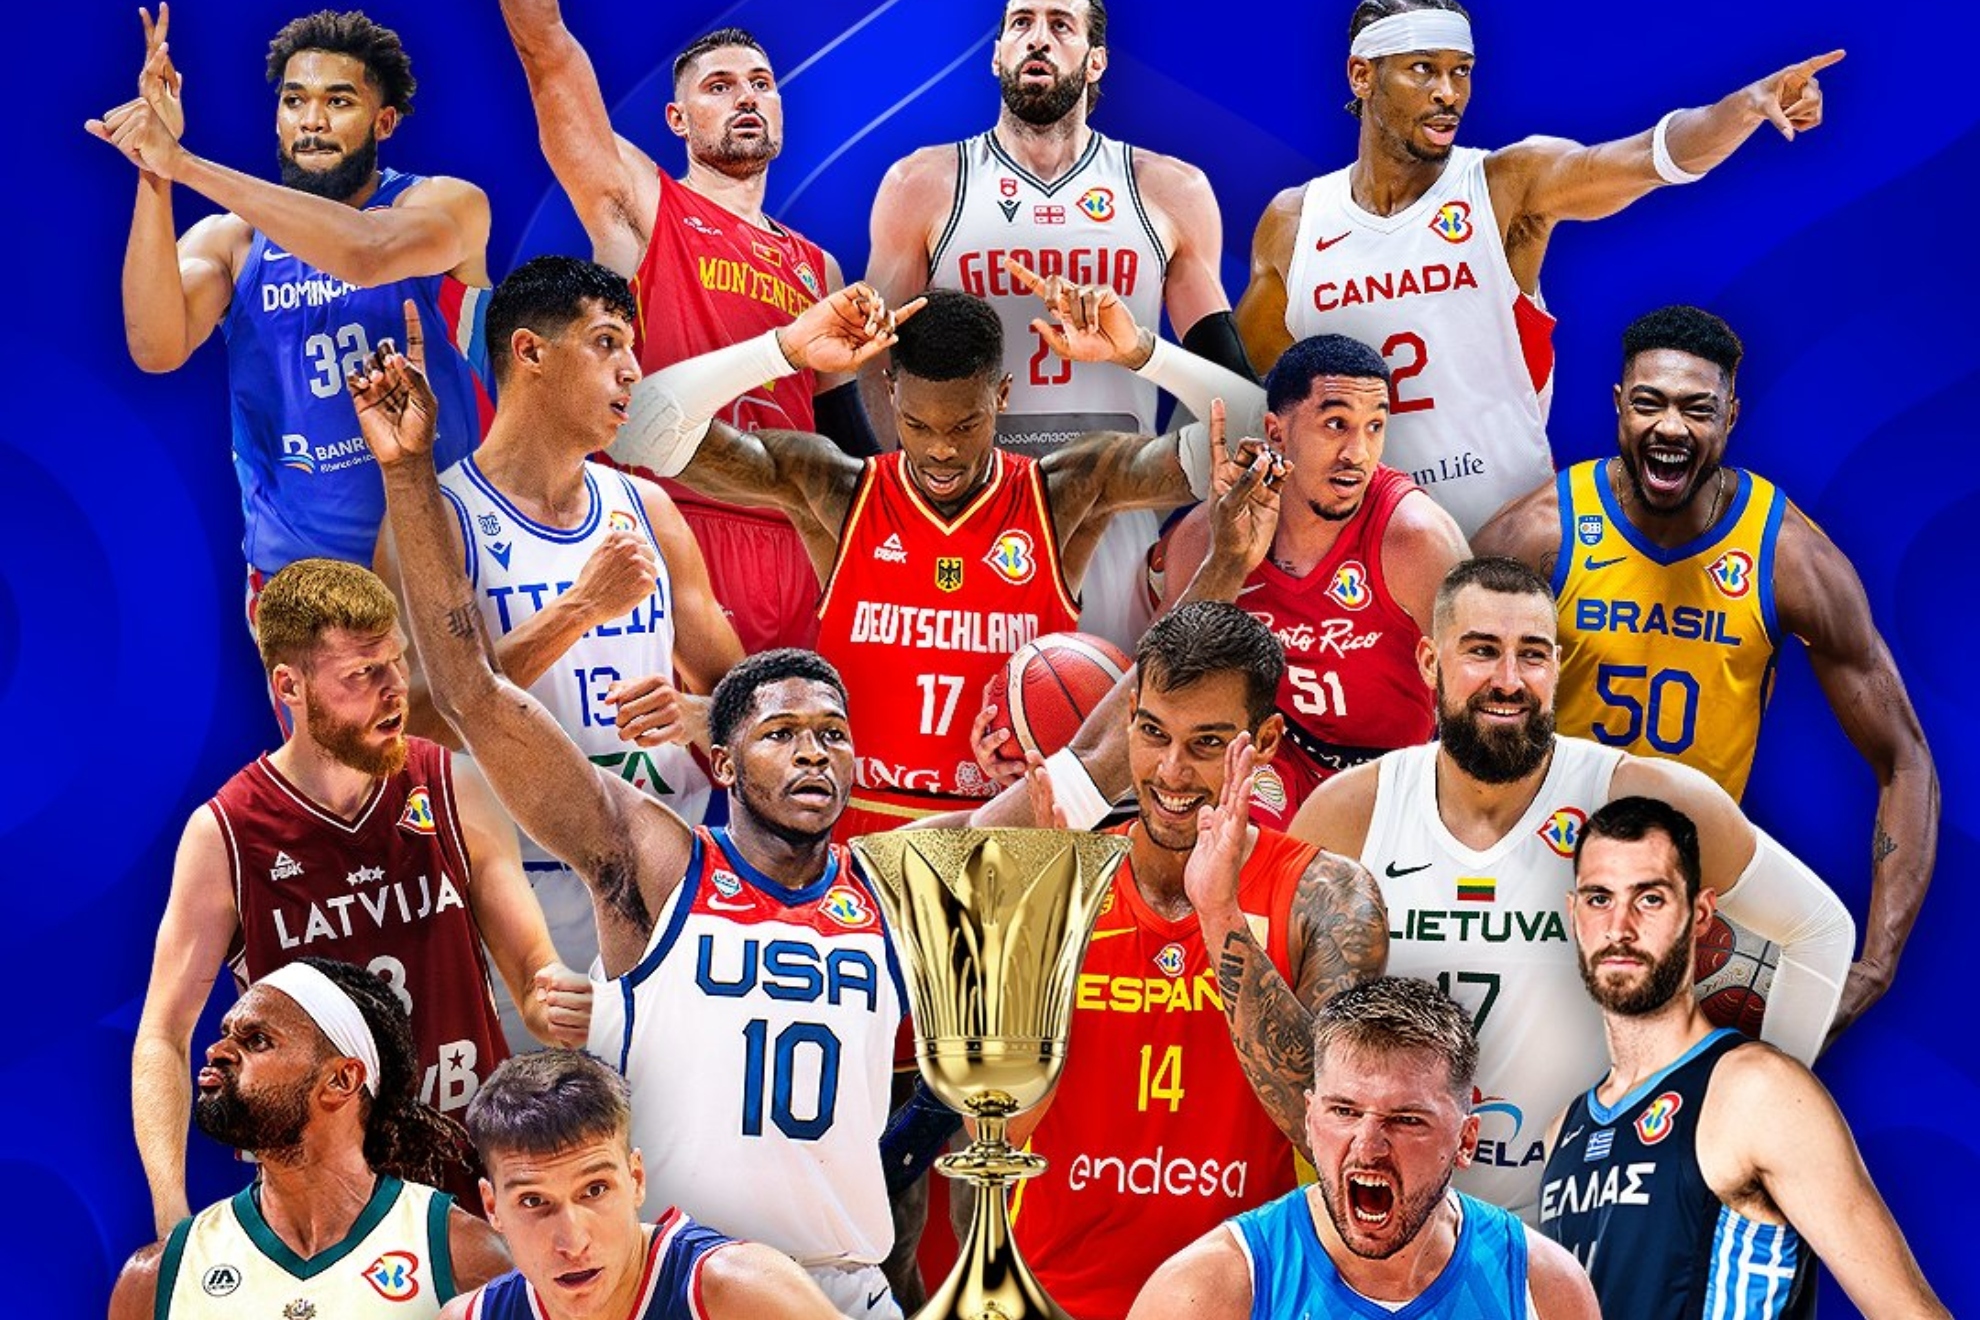 FIBA World Cup glory is the dream of 16 teams: USA, Canada and Spain charge into the second round